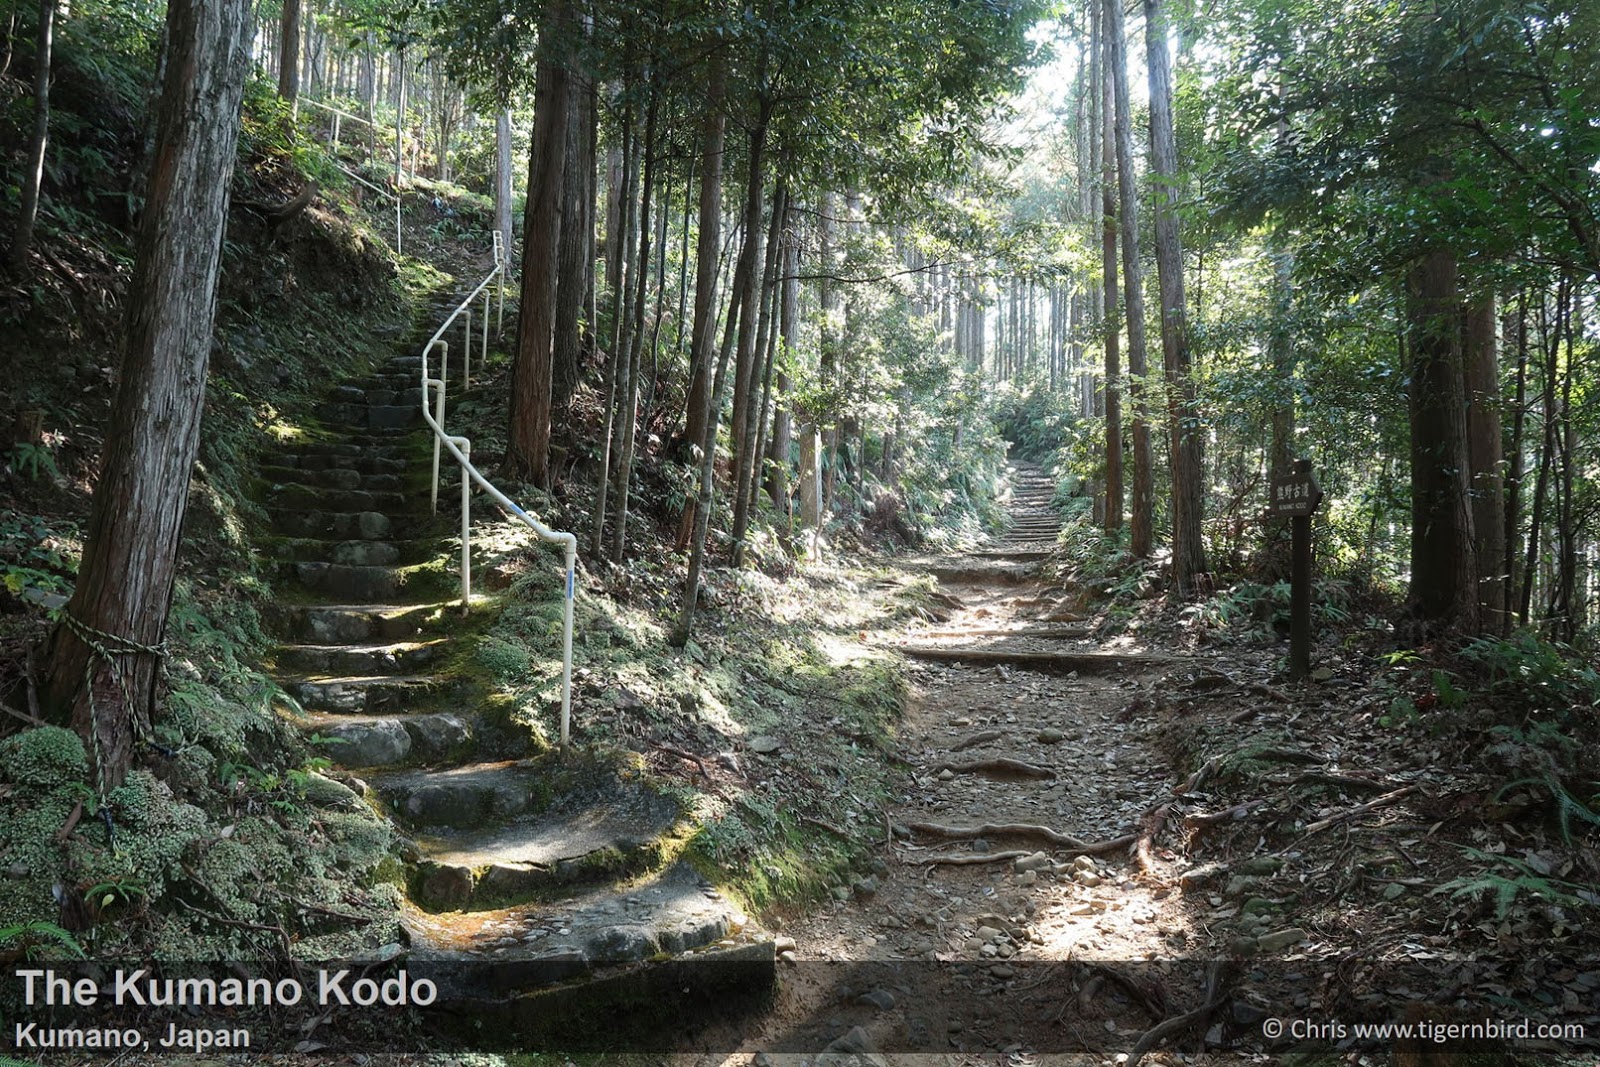 Diverging stone paths through forest in Kumano Kodo, Japan